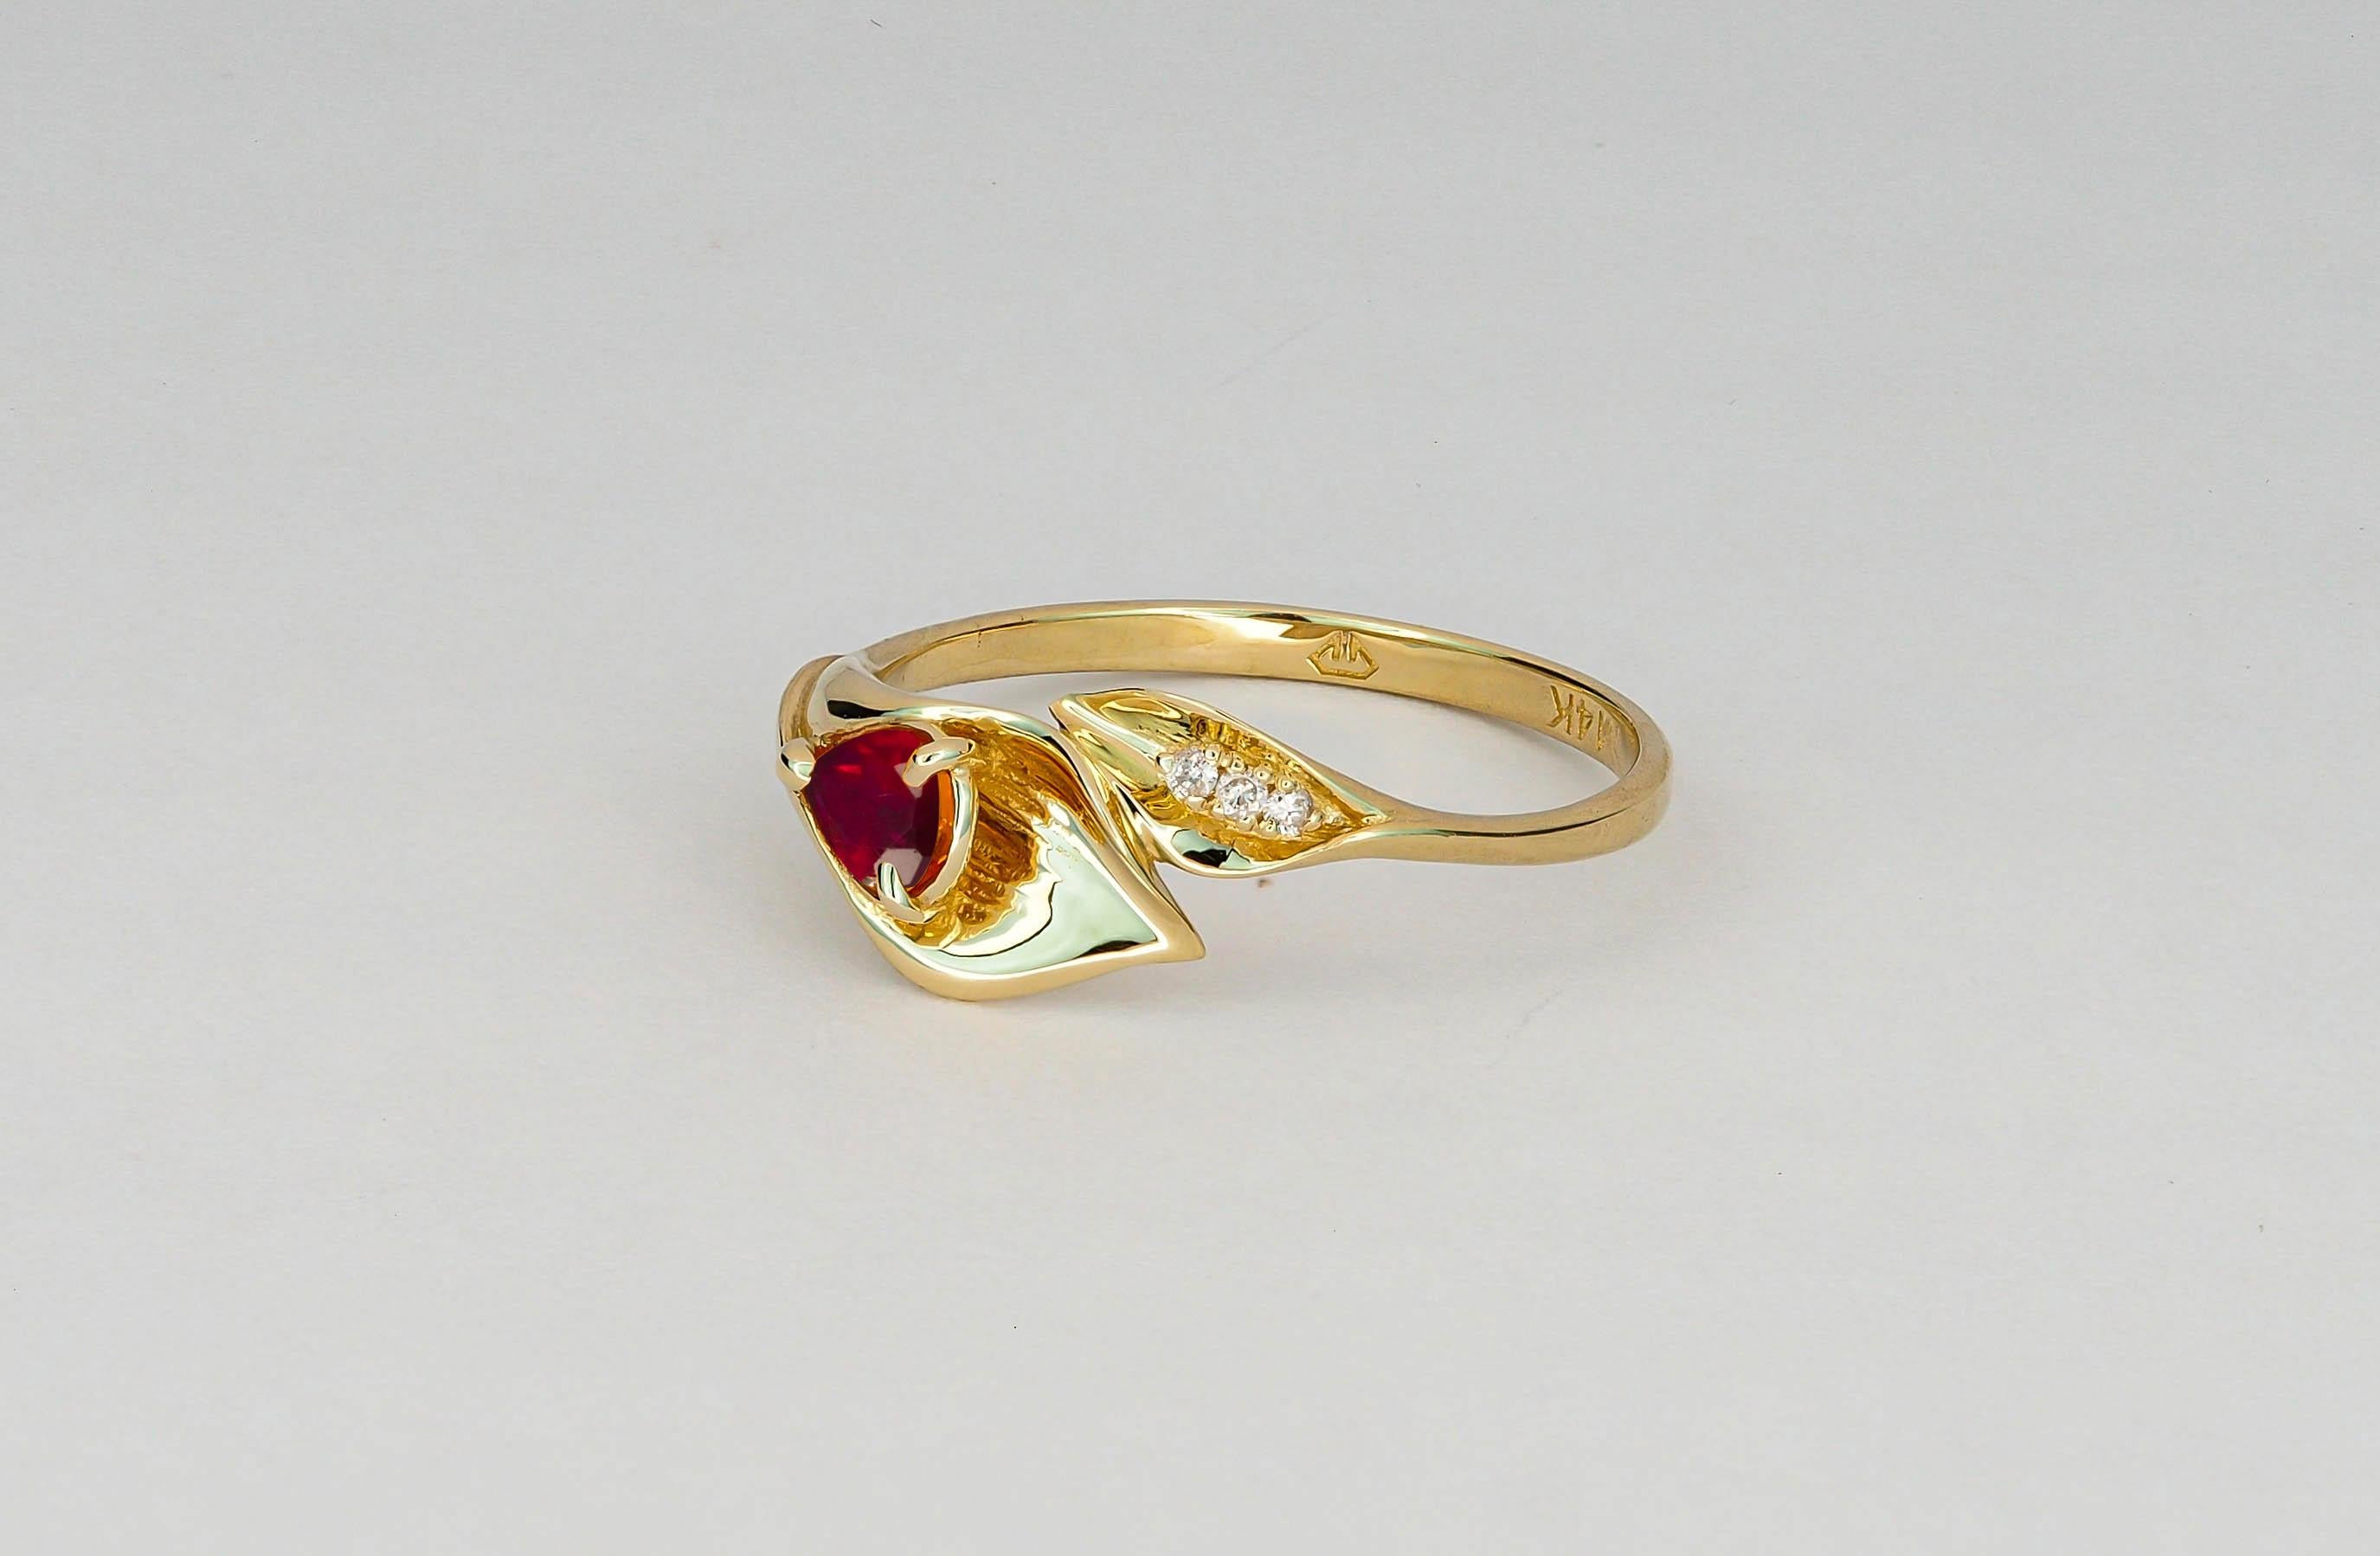 For Sale:  Lily Calla Gold Ring, 14 Karat Gold Ring with Ruby and Diamonds! 8